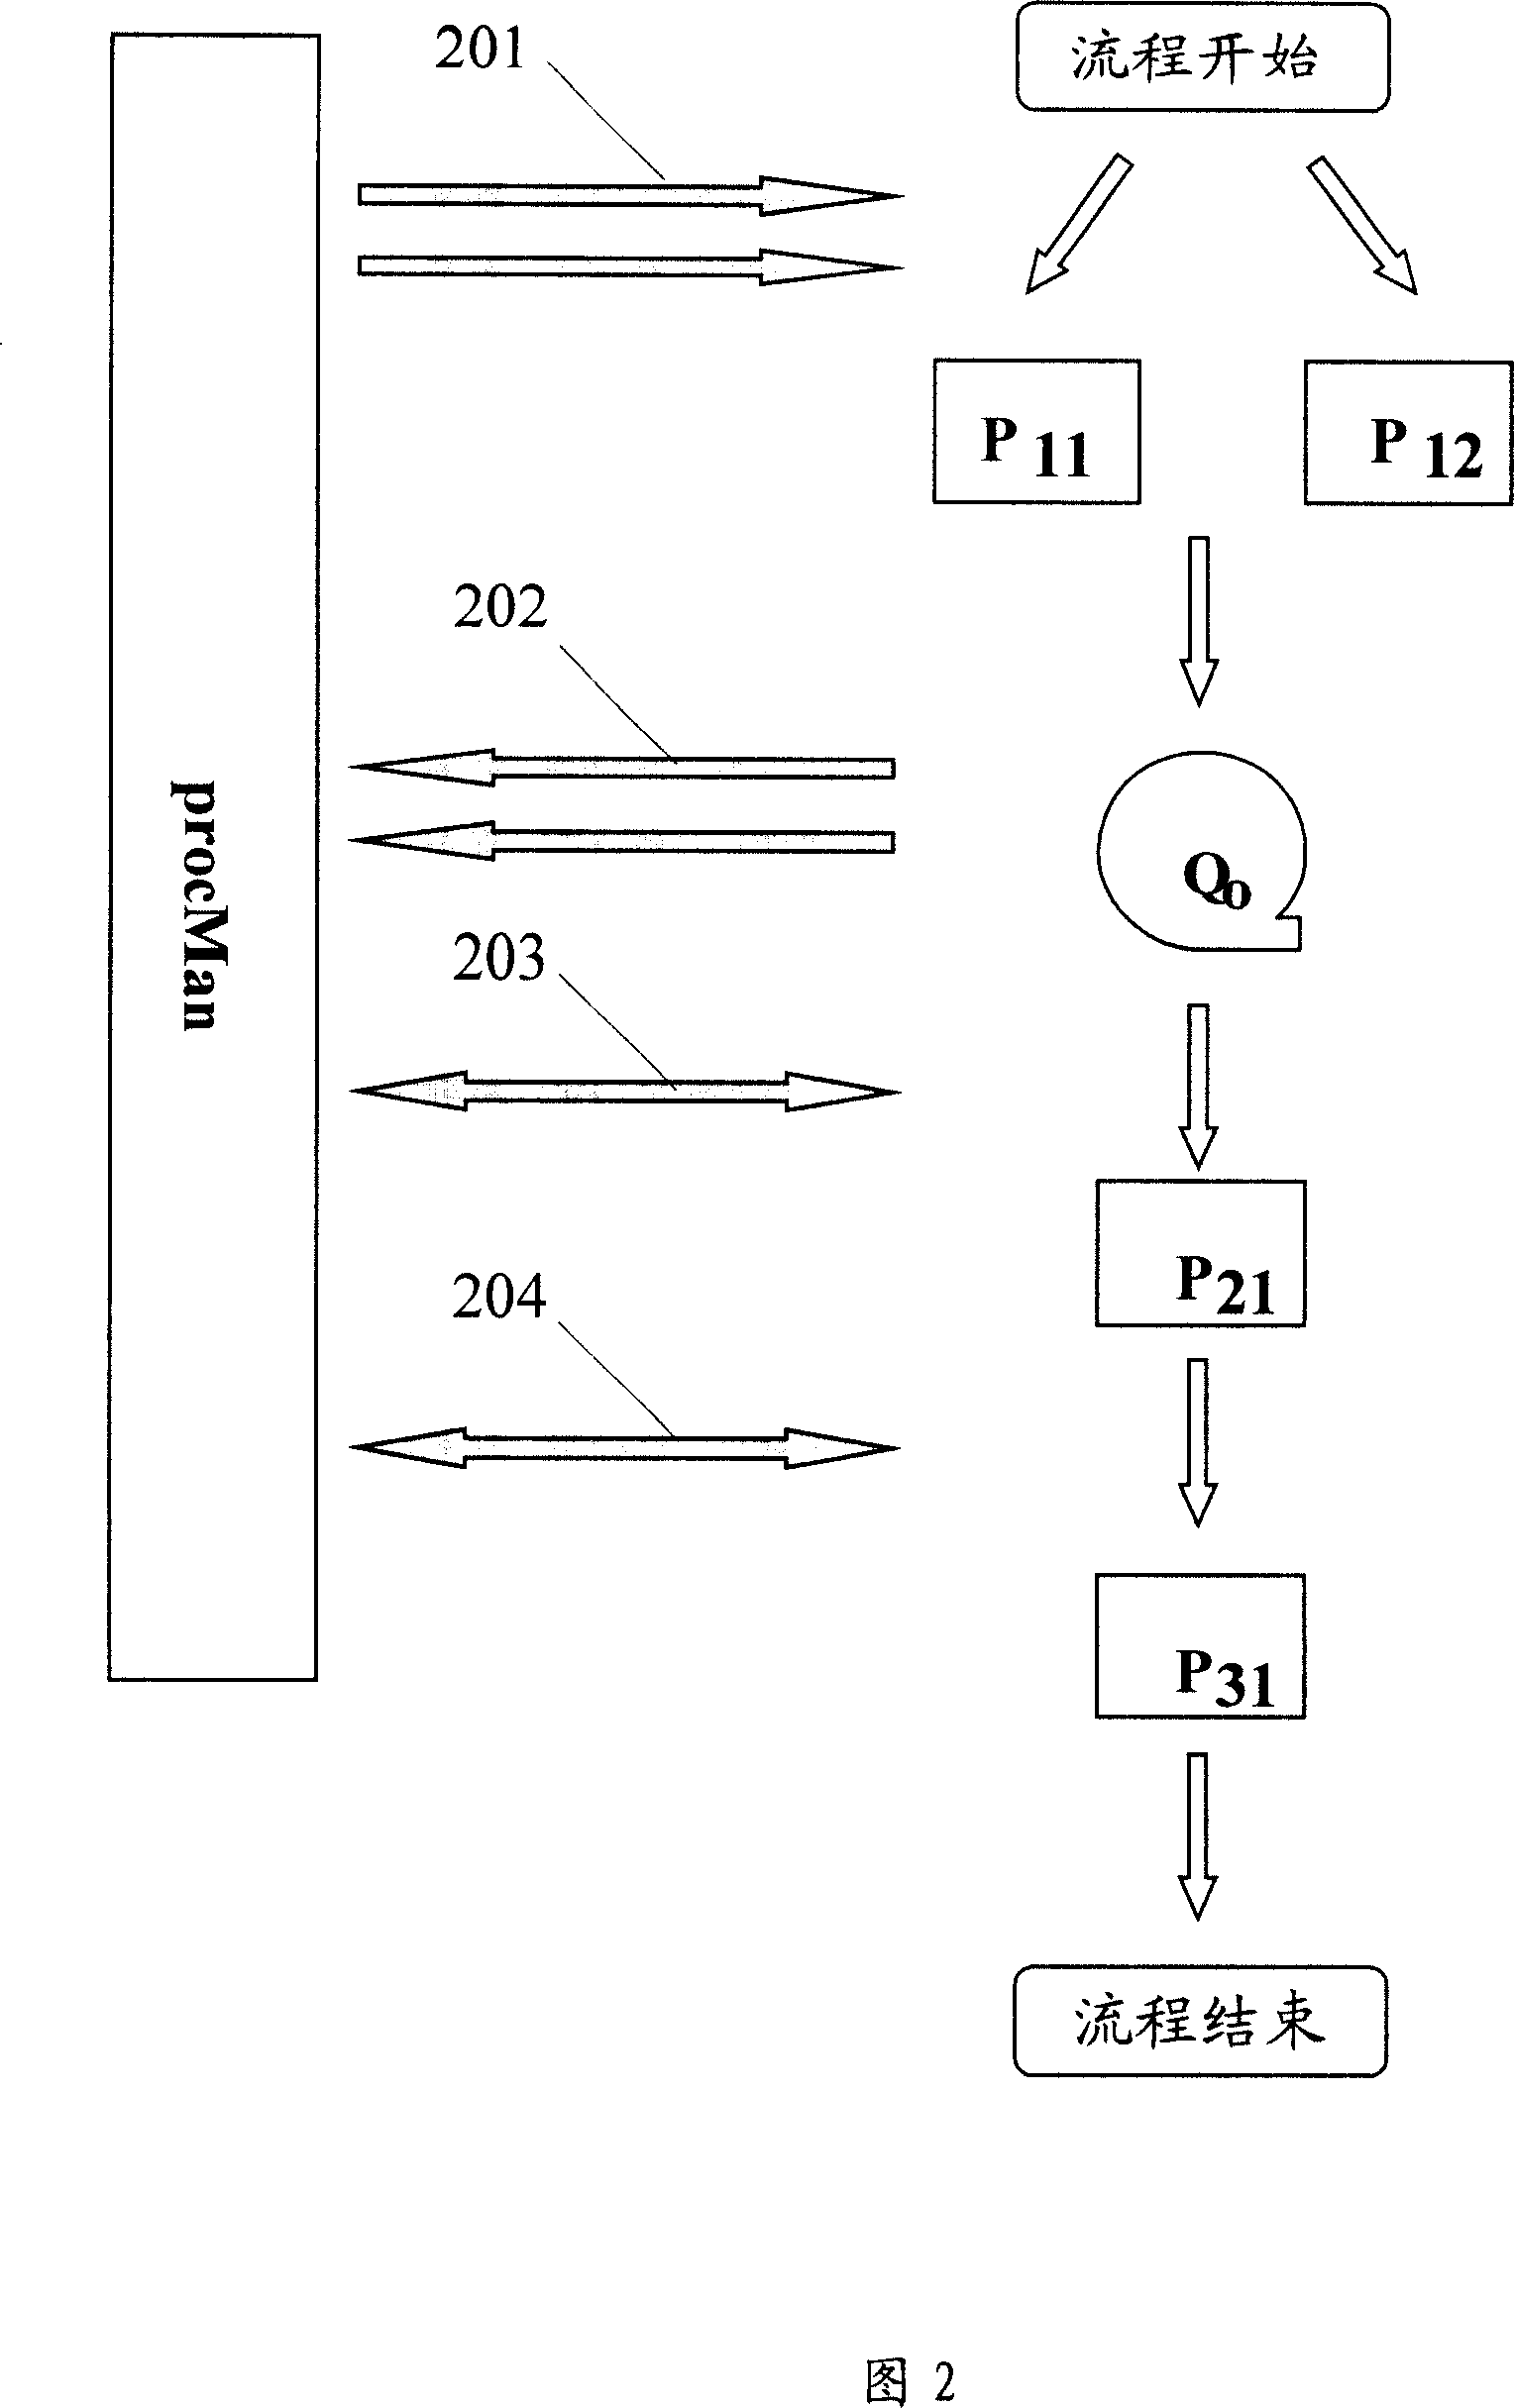 Flowpath scheduling method and system of application progress